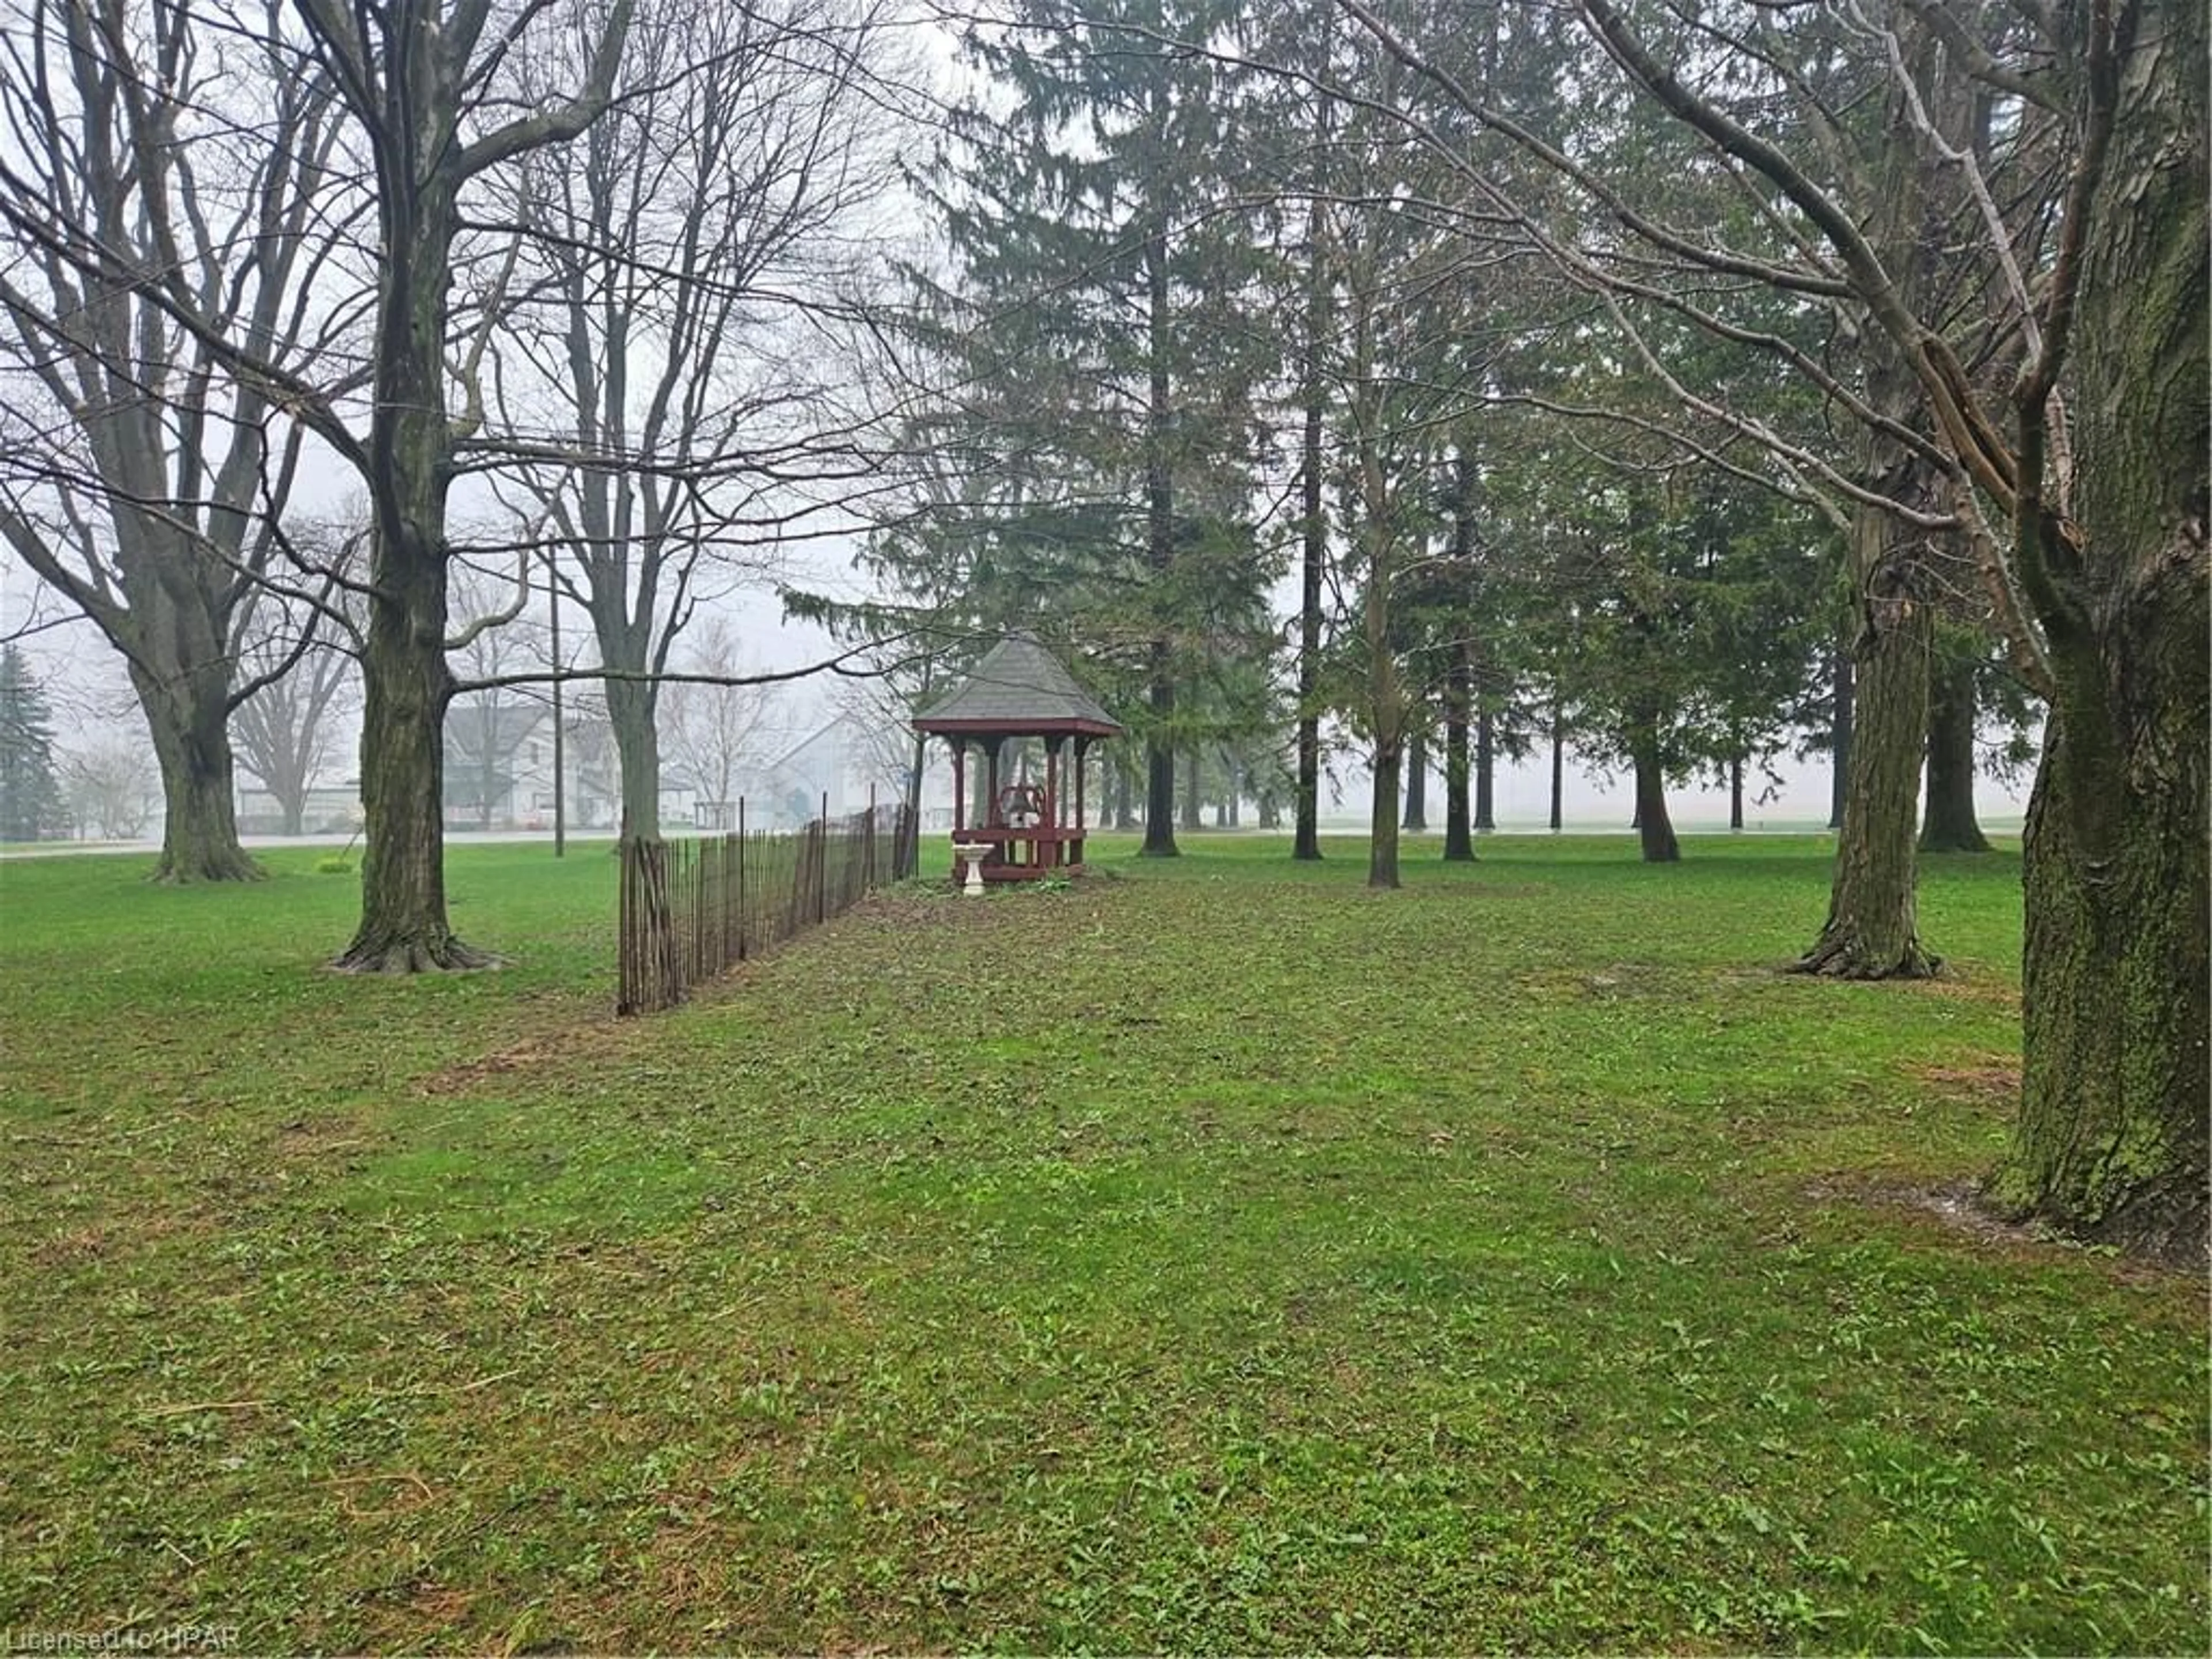 Lakeview for 44411 Sawmill Rd, McKillop Township Ontario N0K 1Z0